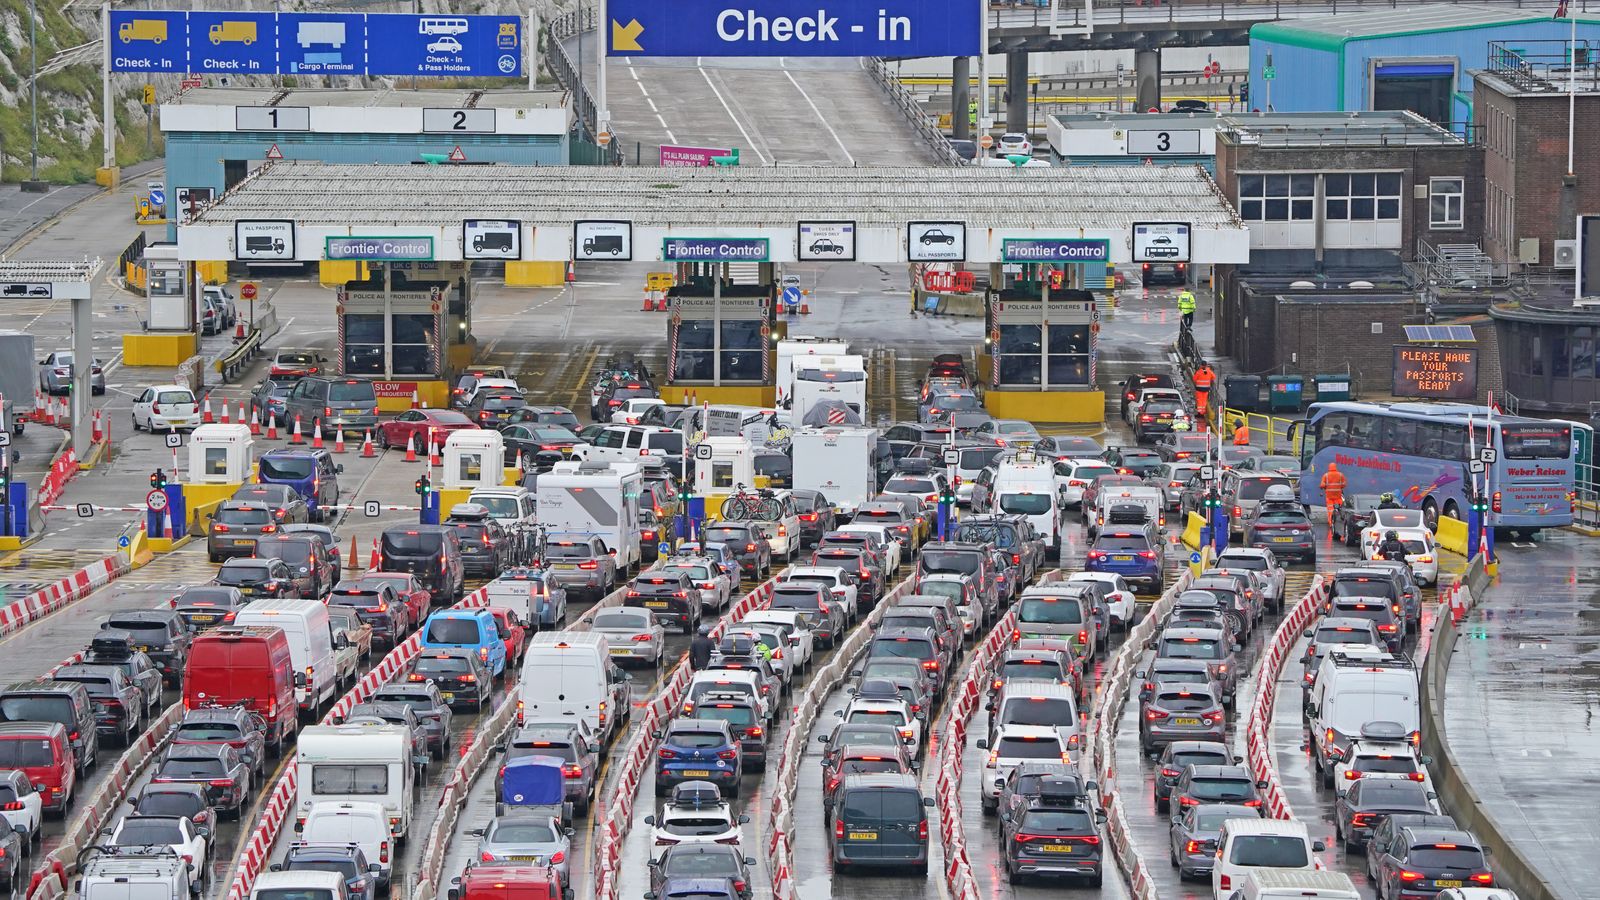 Port of Dover traffic: Travellers face two hour delays as summer holiday queues build